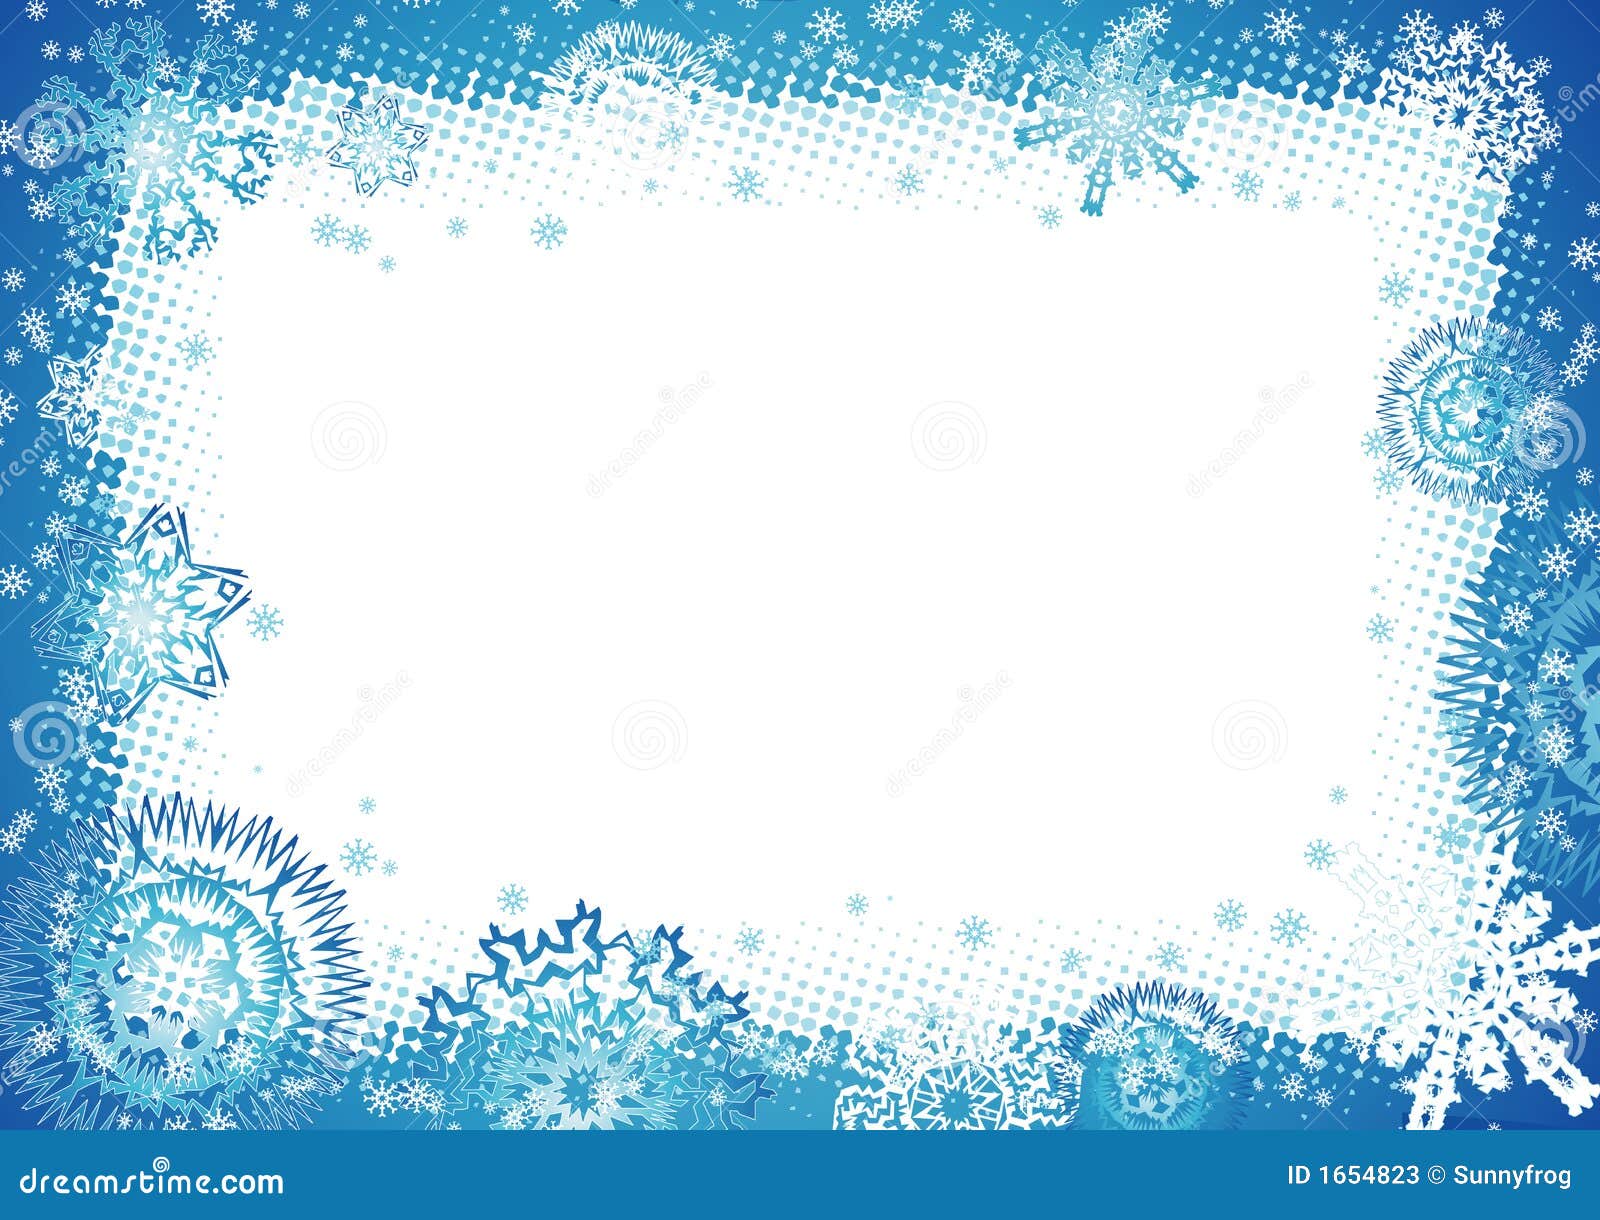 Blue christmas background with snowflakes,vector illustration.